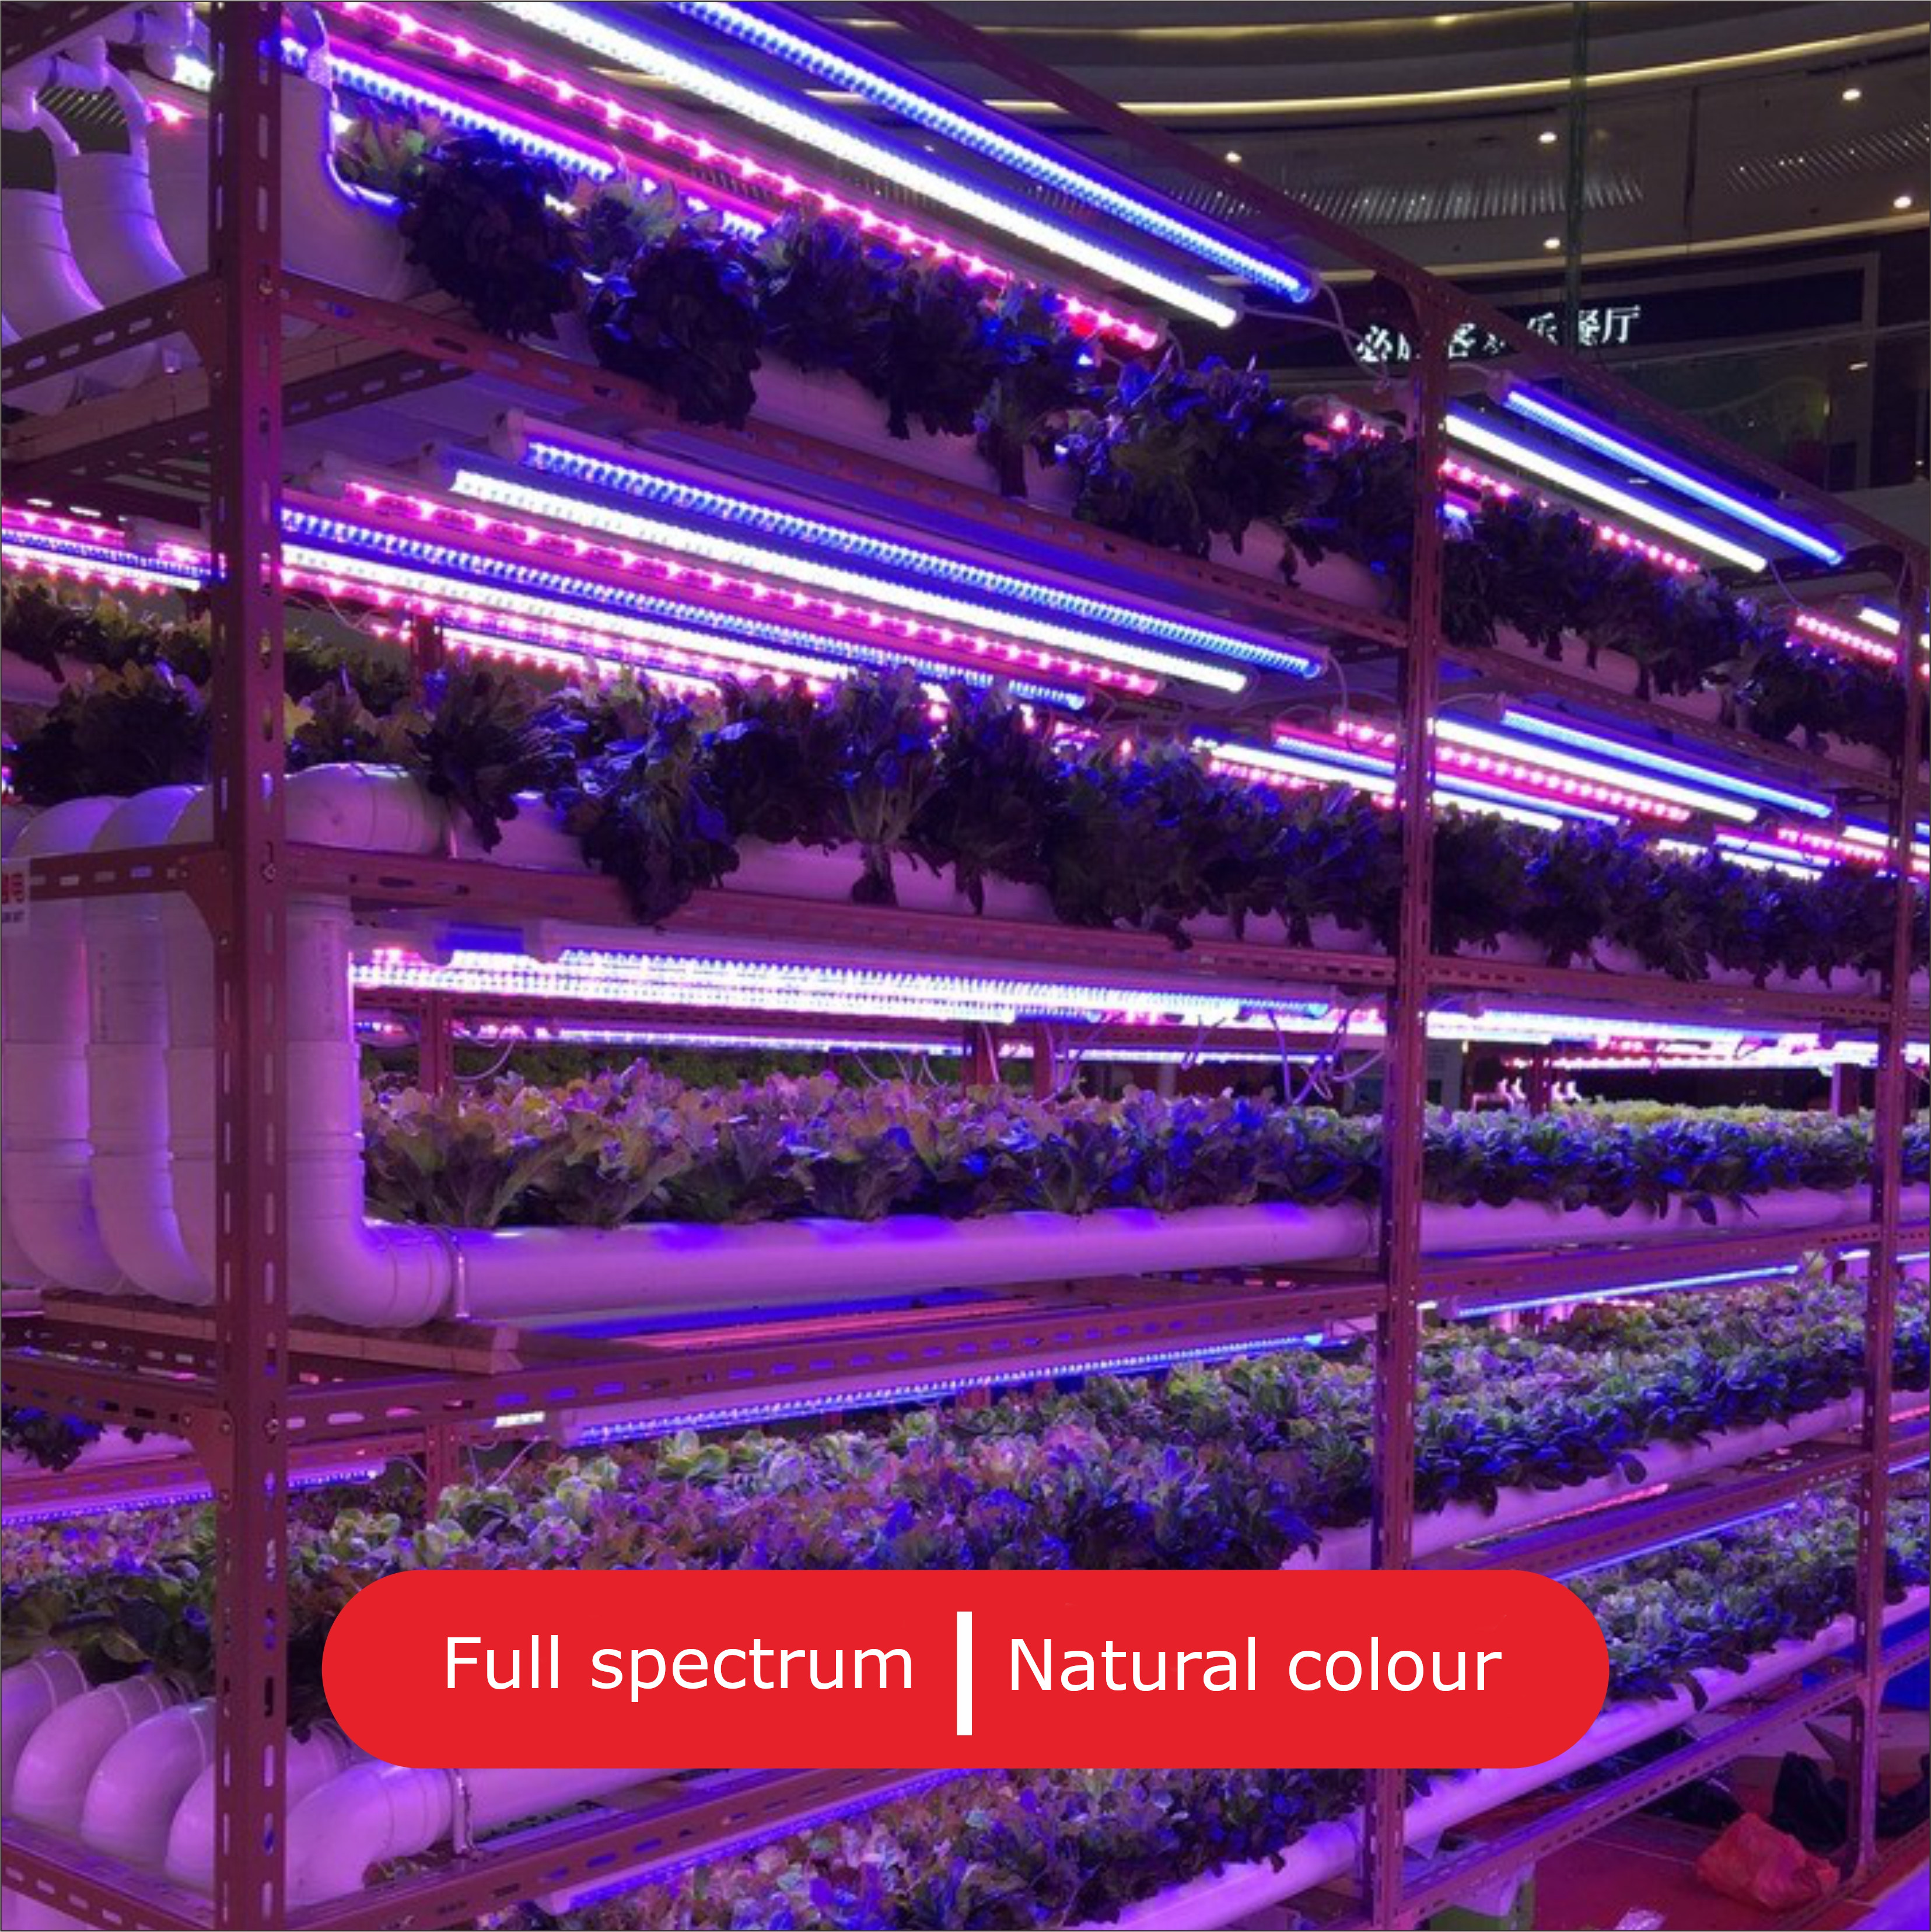 Led  plant grow tube light T6 600mm with New Diodes & IR Lights Full Spectrum Veg Bloom Growing Lamps for Indoor Plants Seeding Flower Led Plant Light Fixture